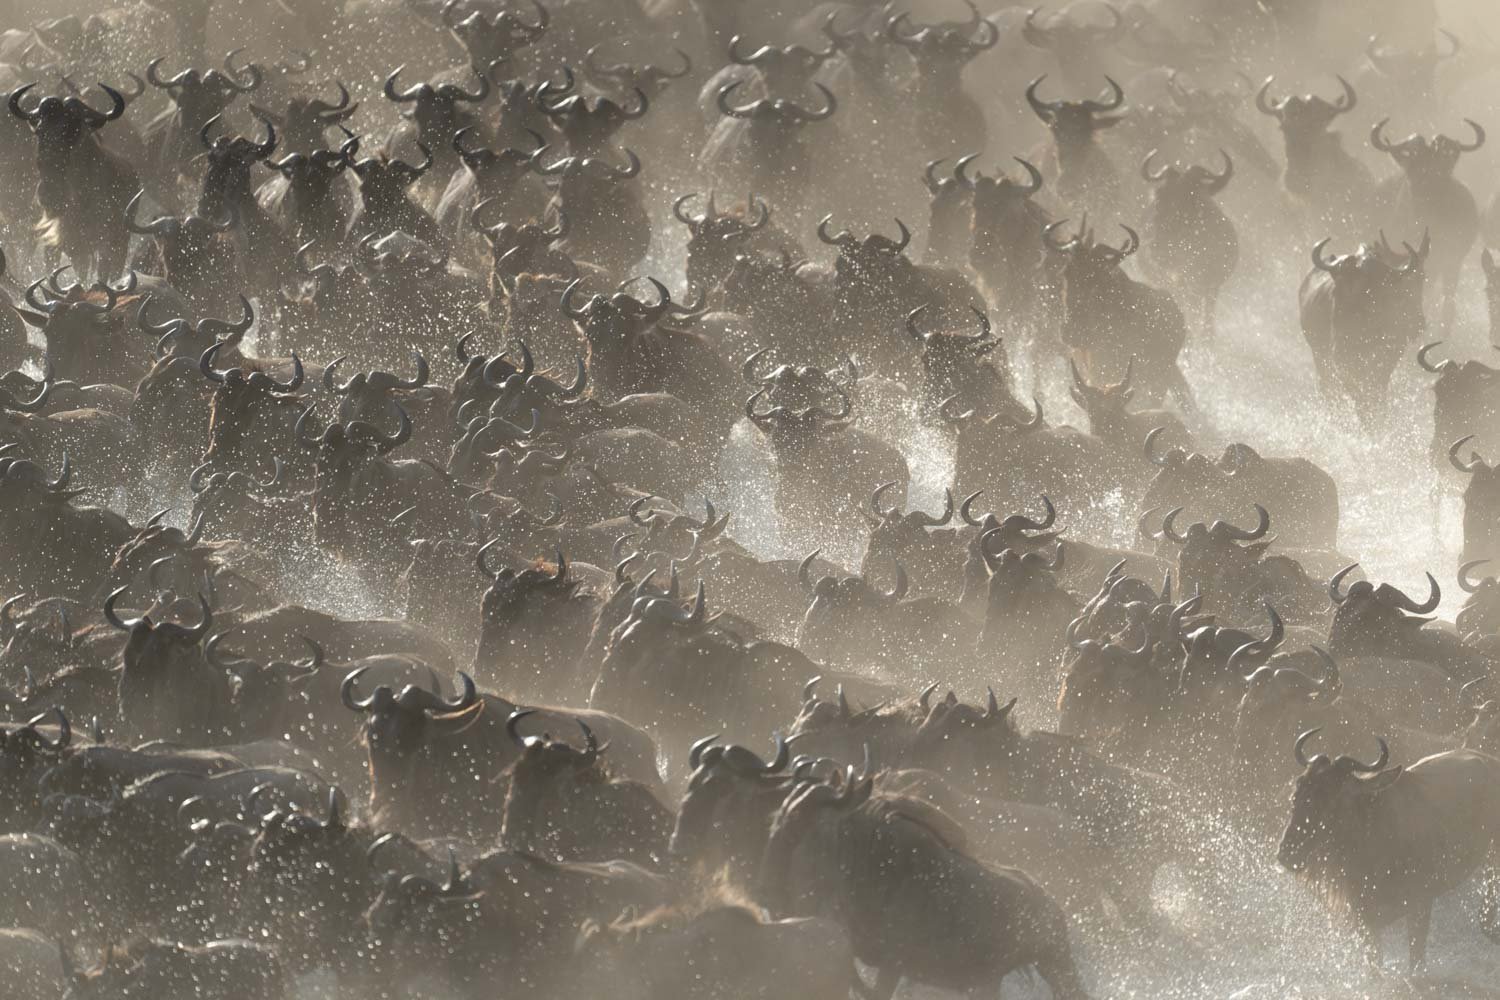 Confusion of blue wildebeest galloping through dust